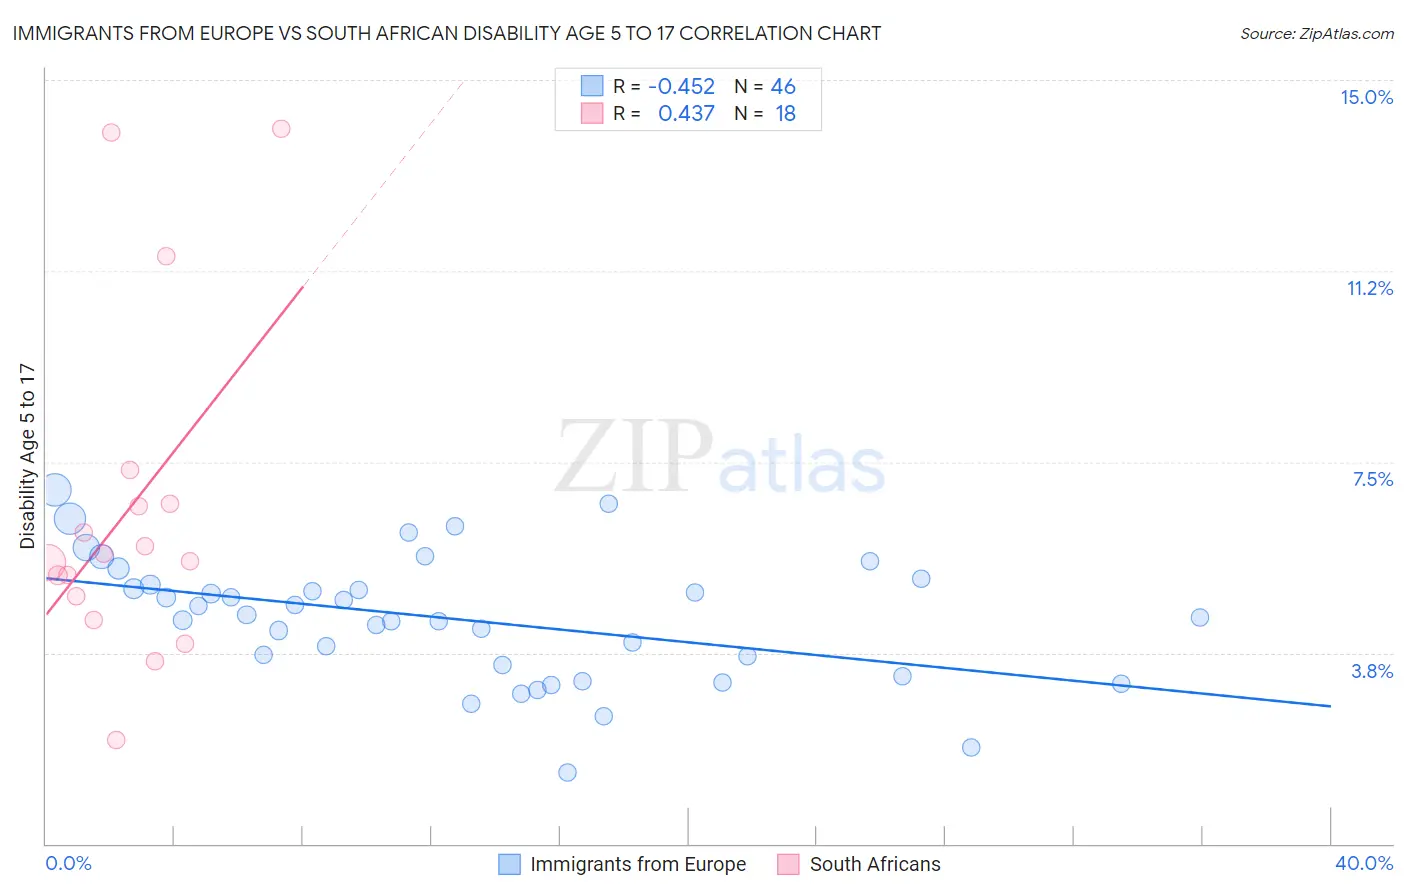 Immigrants from Europe vs South African Disability Age 5 to 17